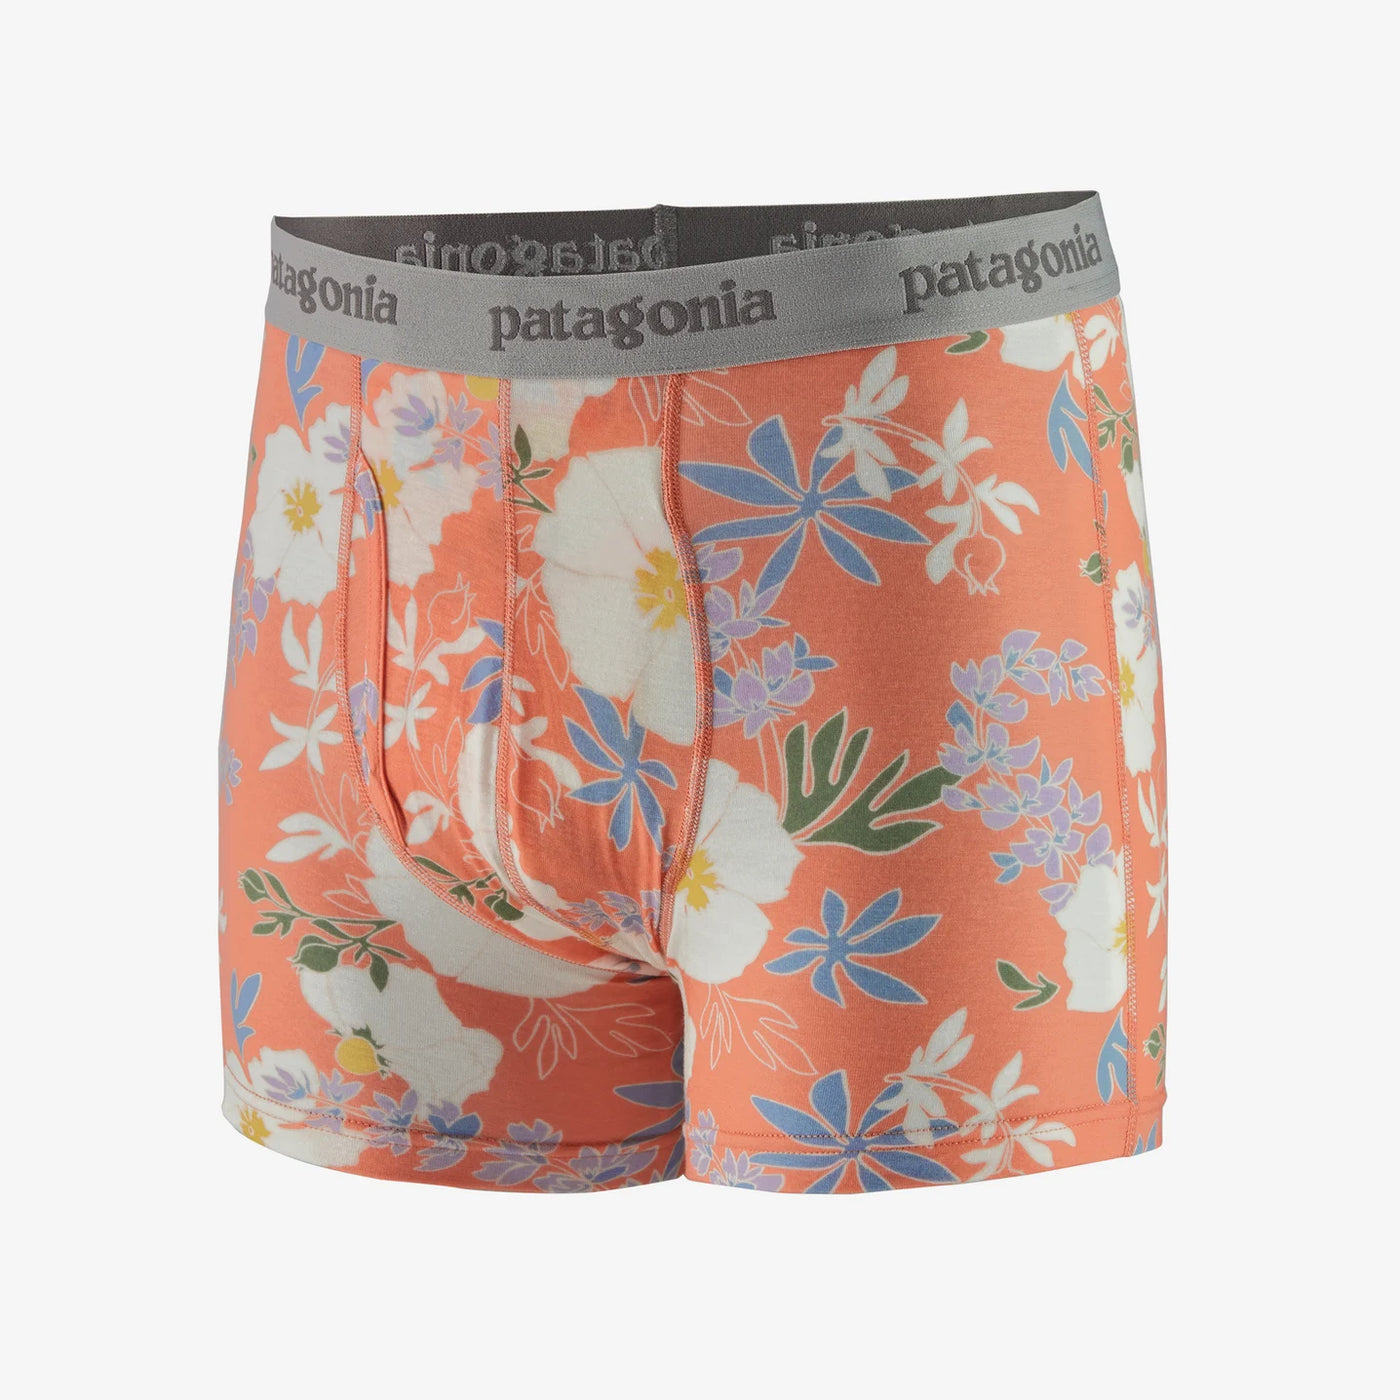 Patagonia Men's Essential Boxer Briefs - 3"-MENS CLOTHING-Flower Power Tigerlily Orange-S-Kevin's Fine Outdoor Gear & Apparel